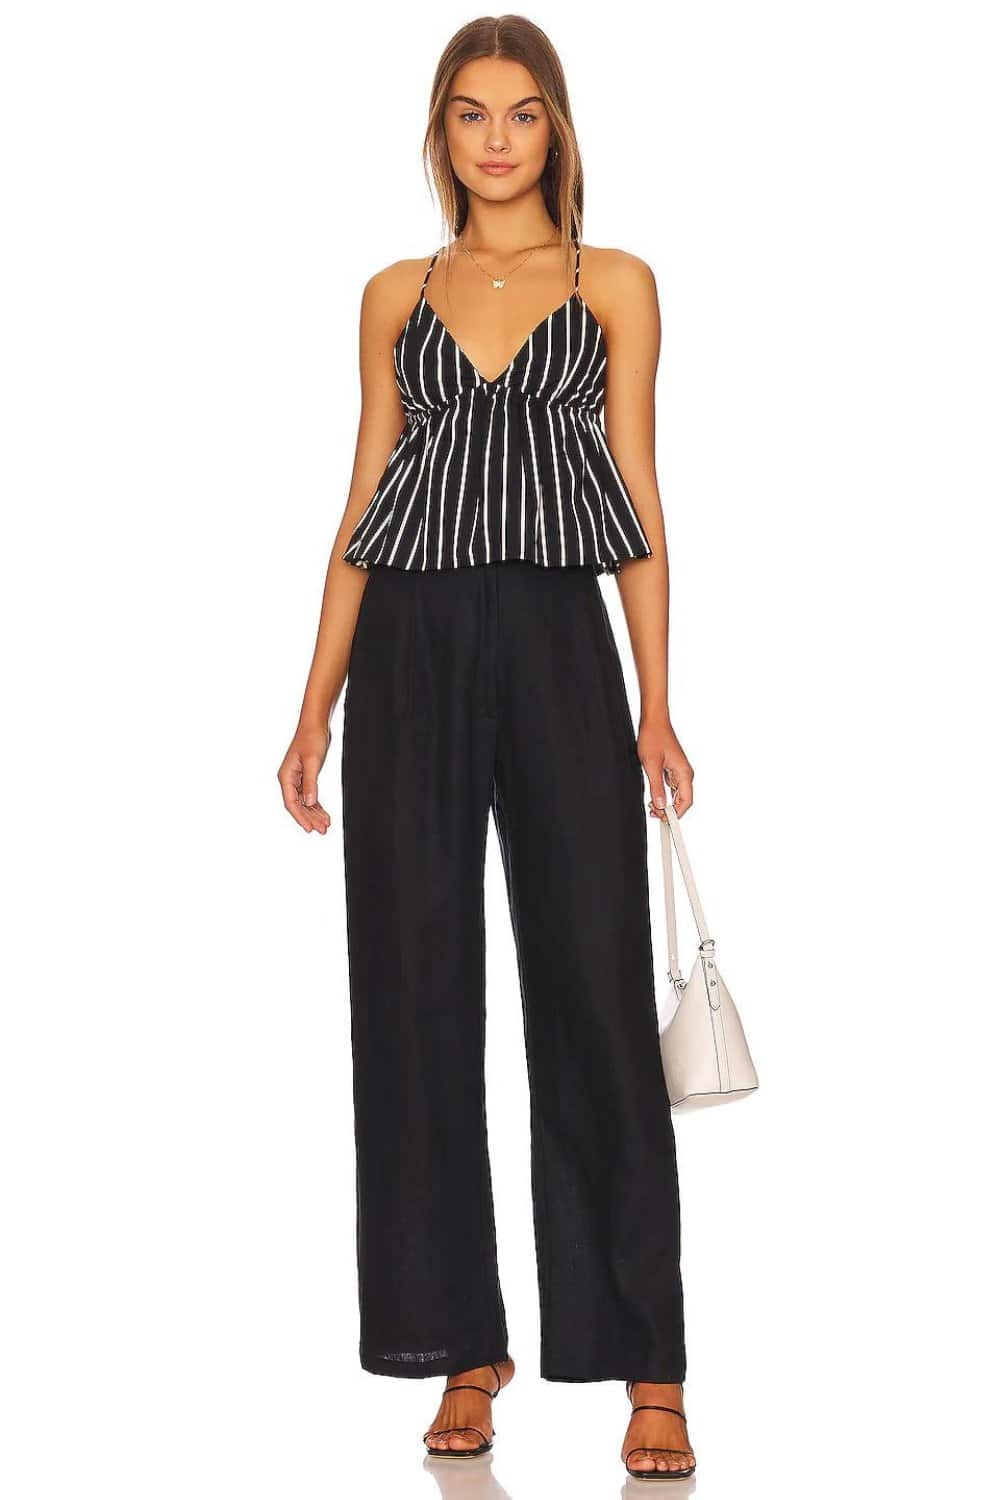 Night time outfit on a beach resort with linen pants